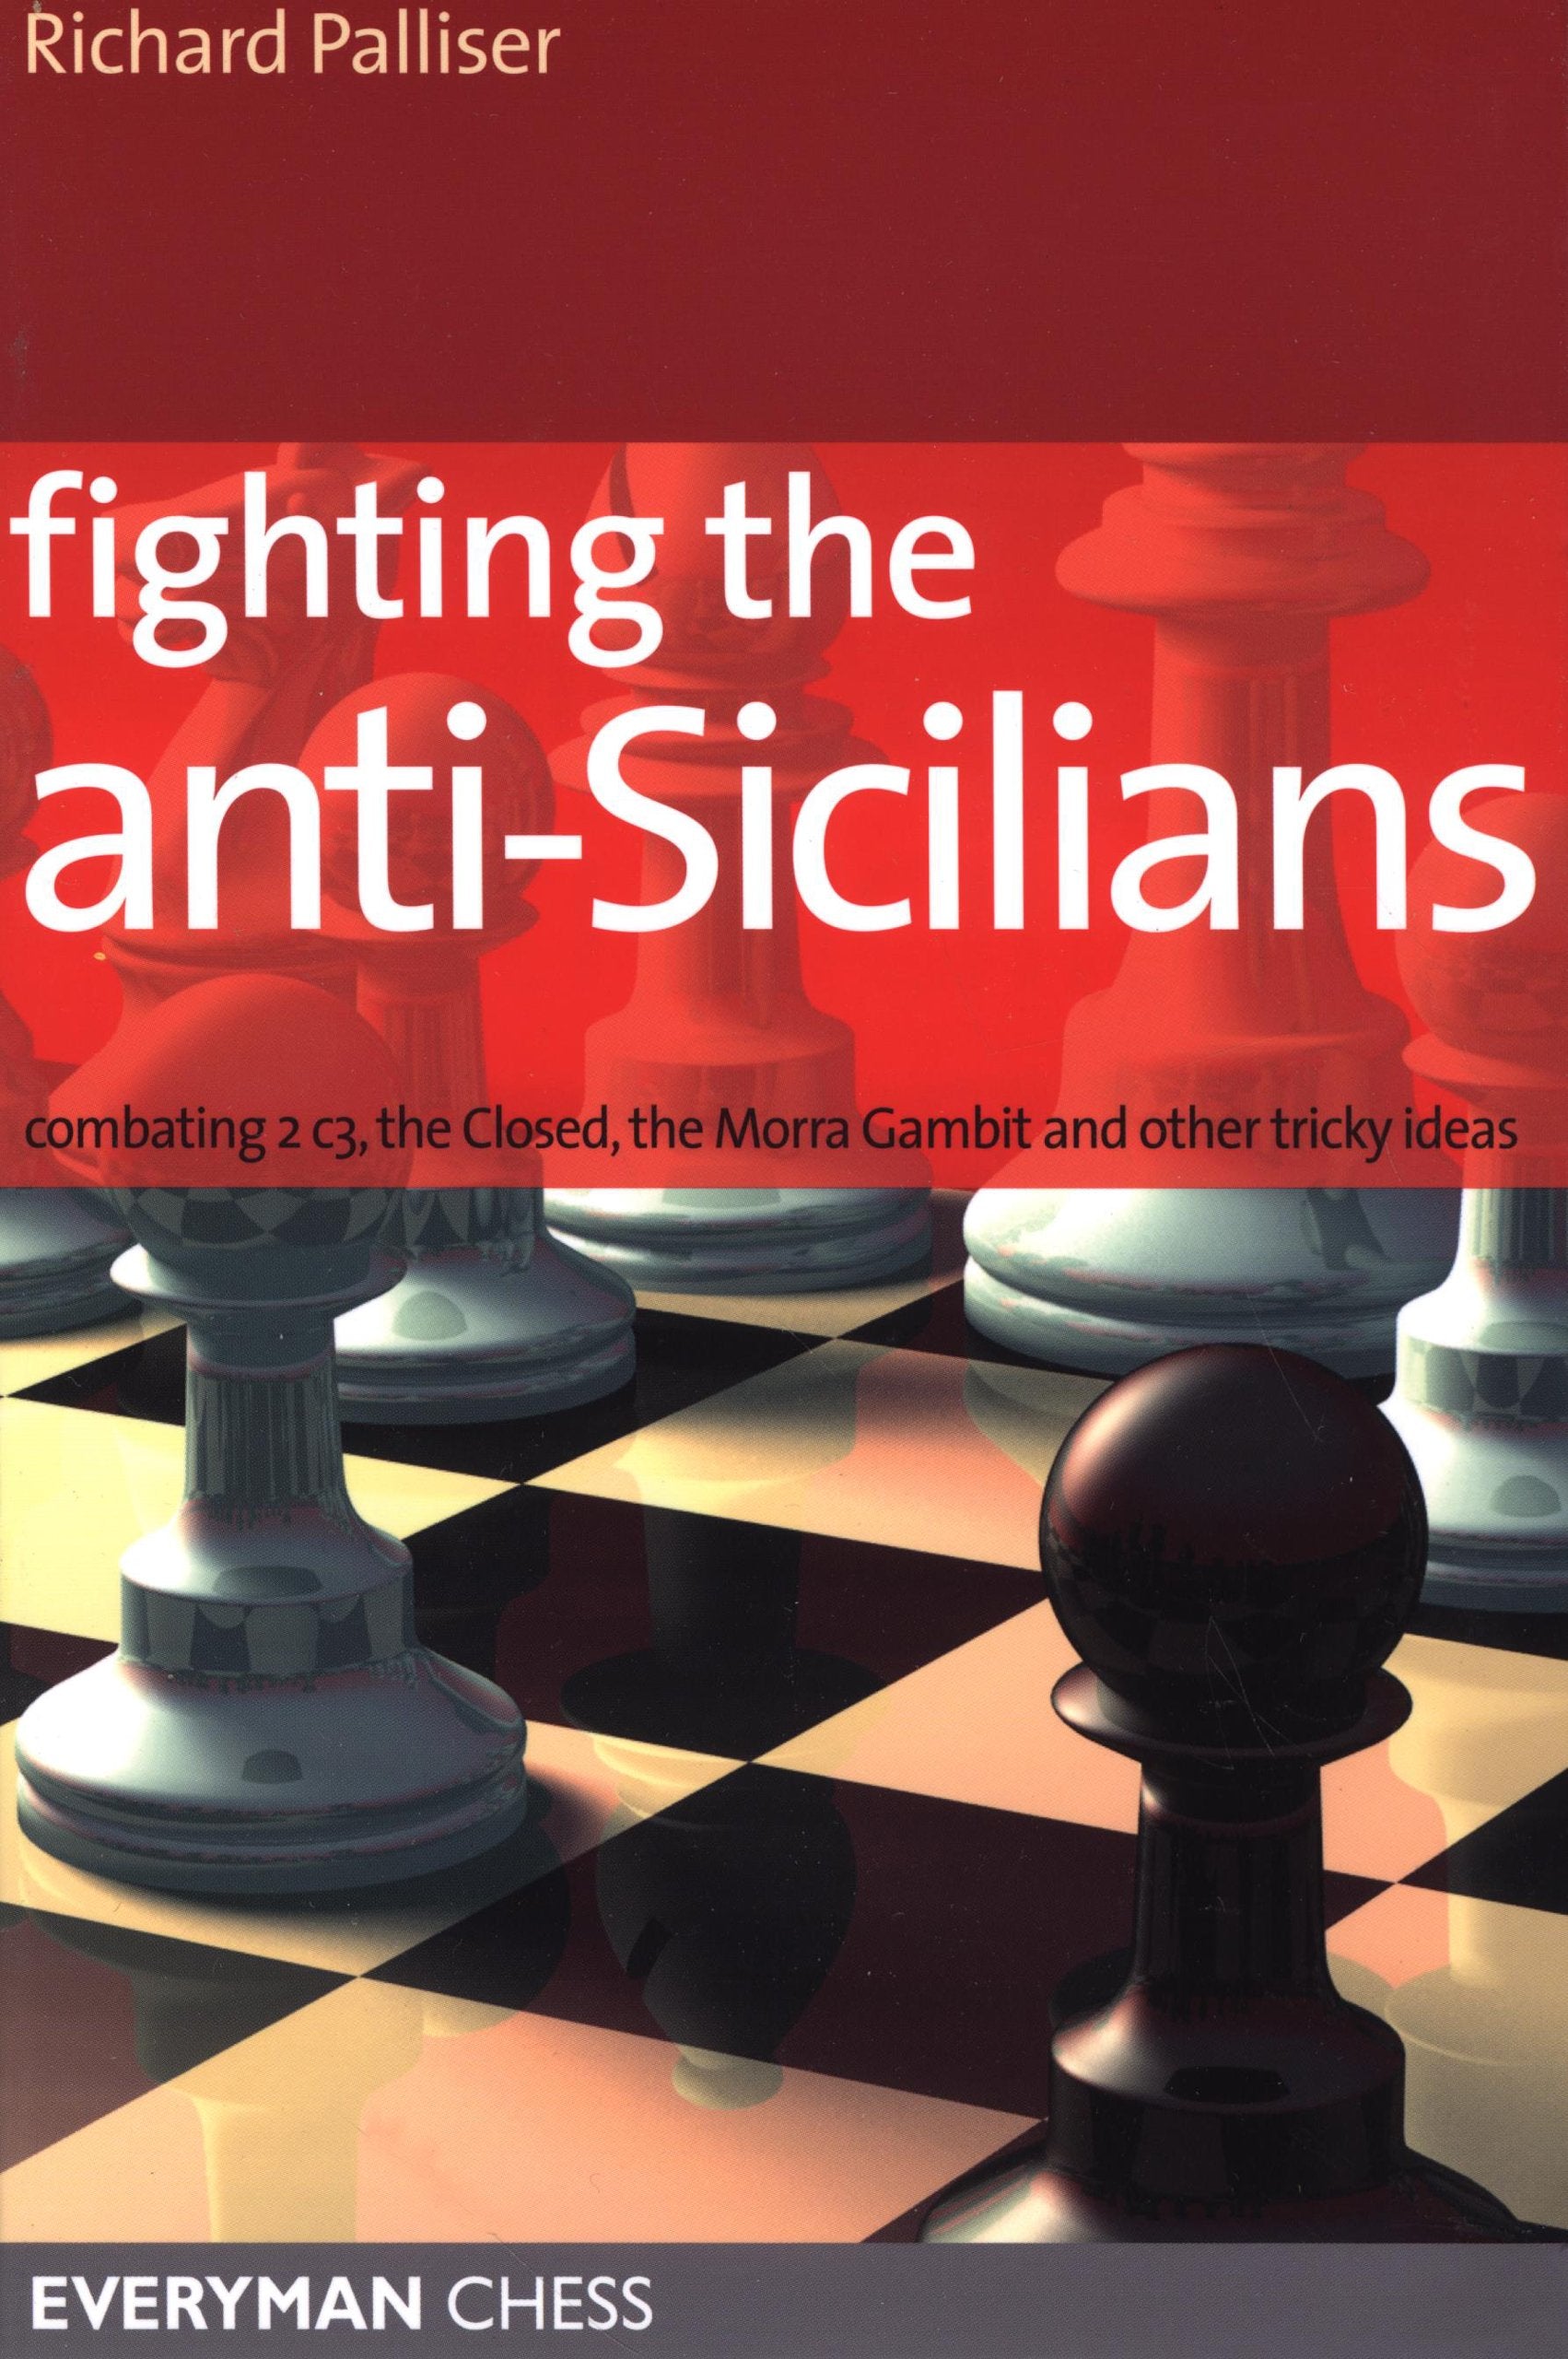 Books on the Sicilian Defence.